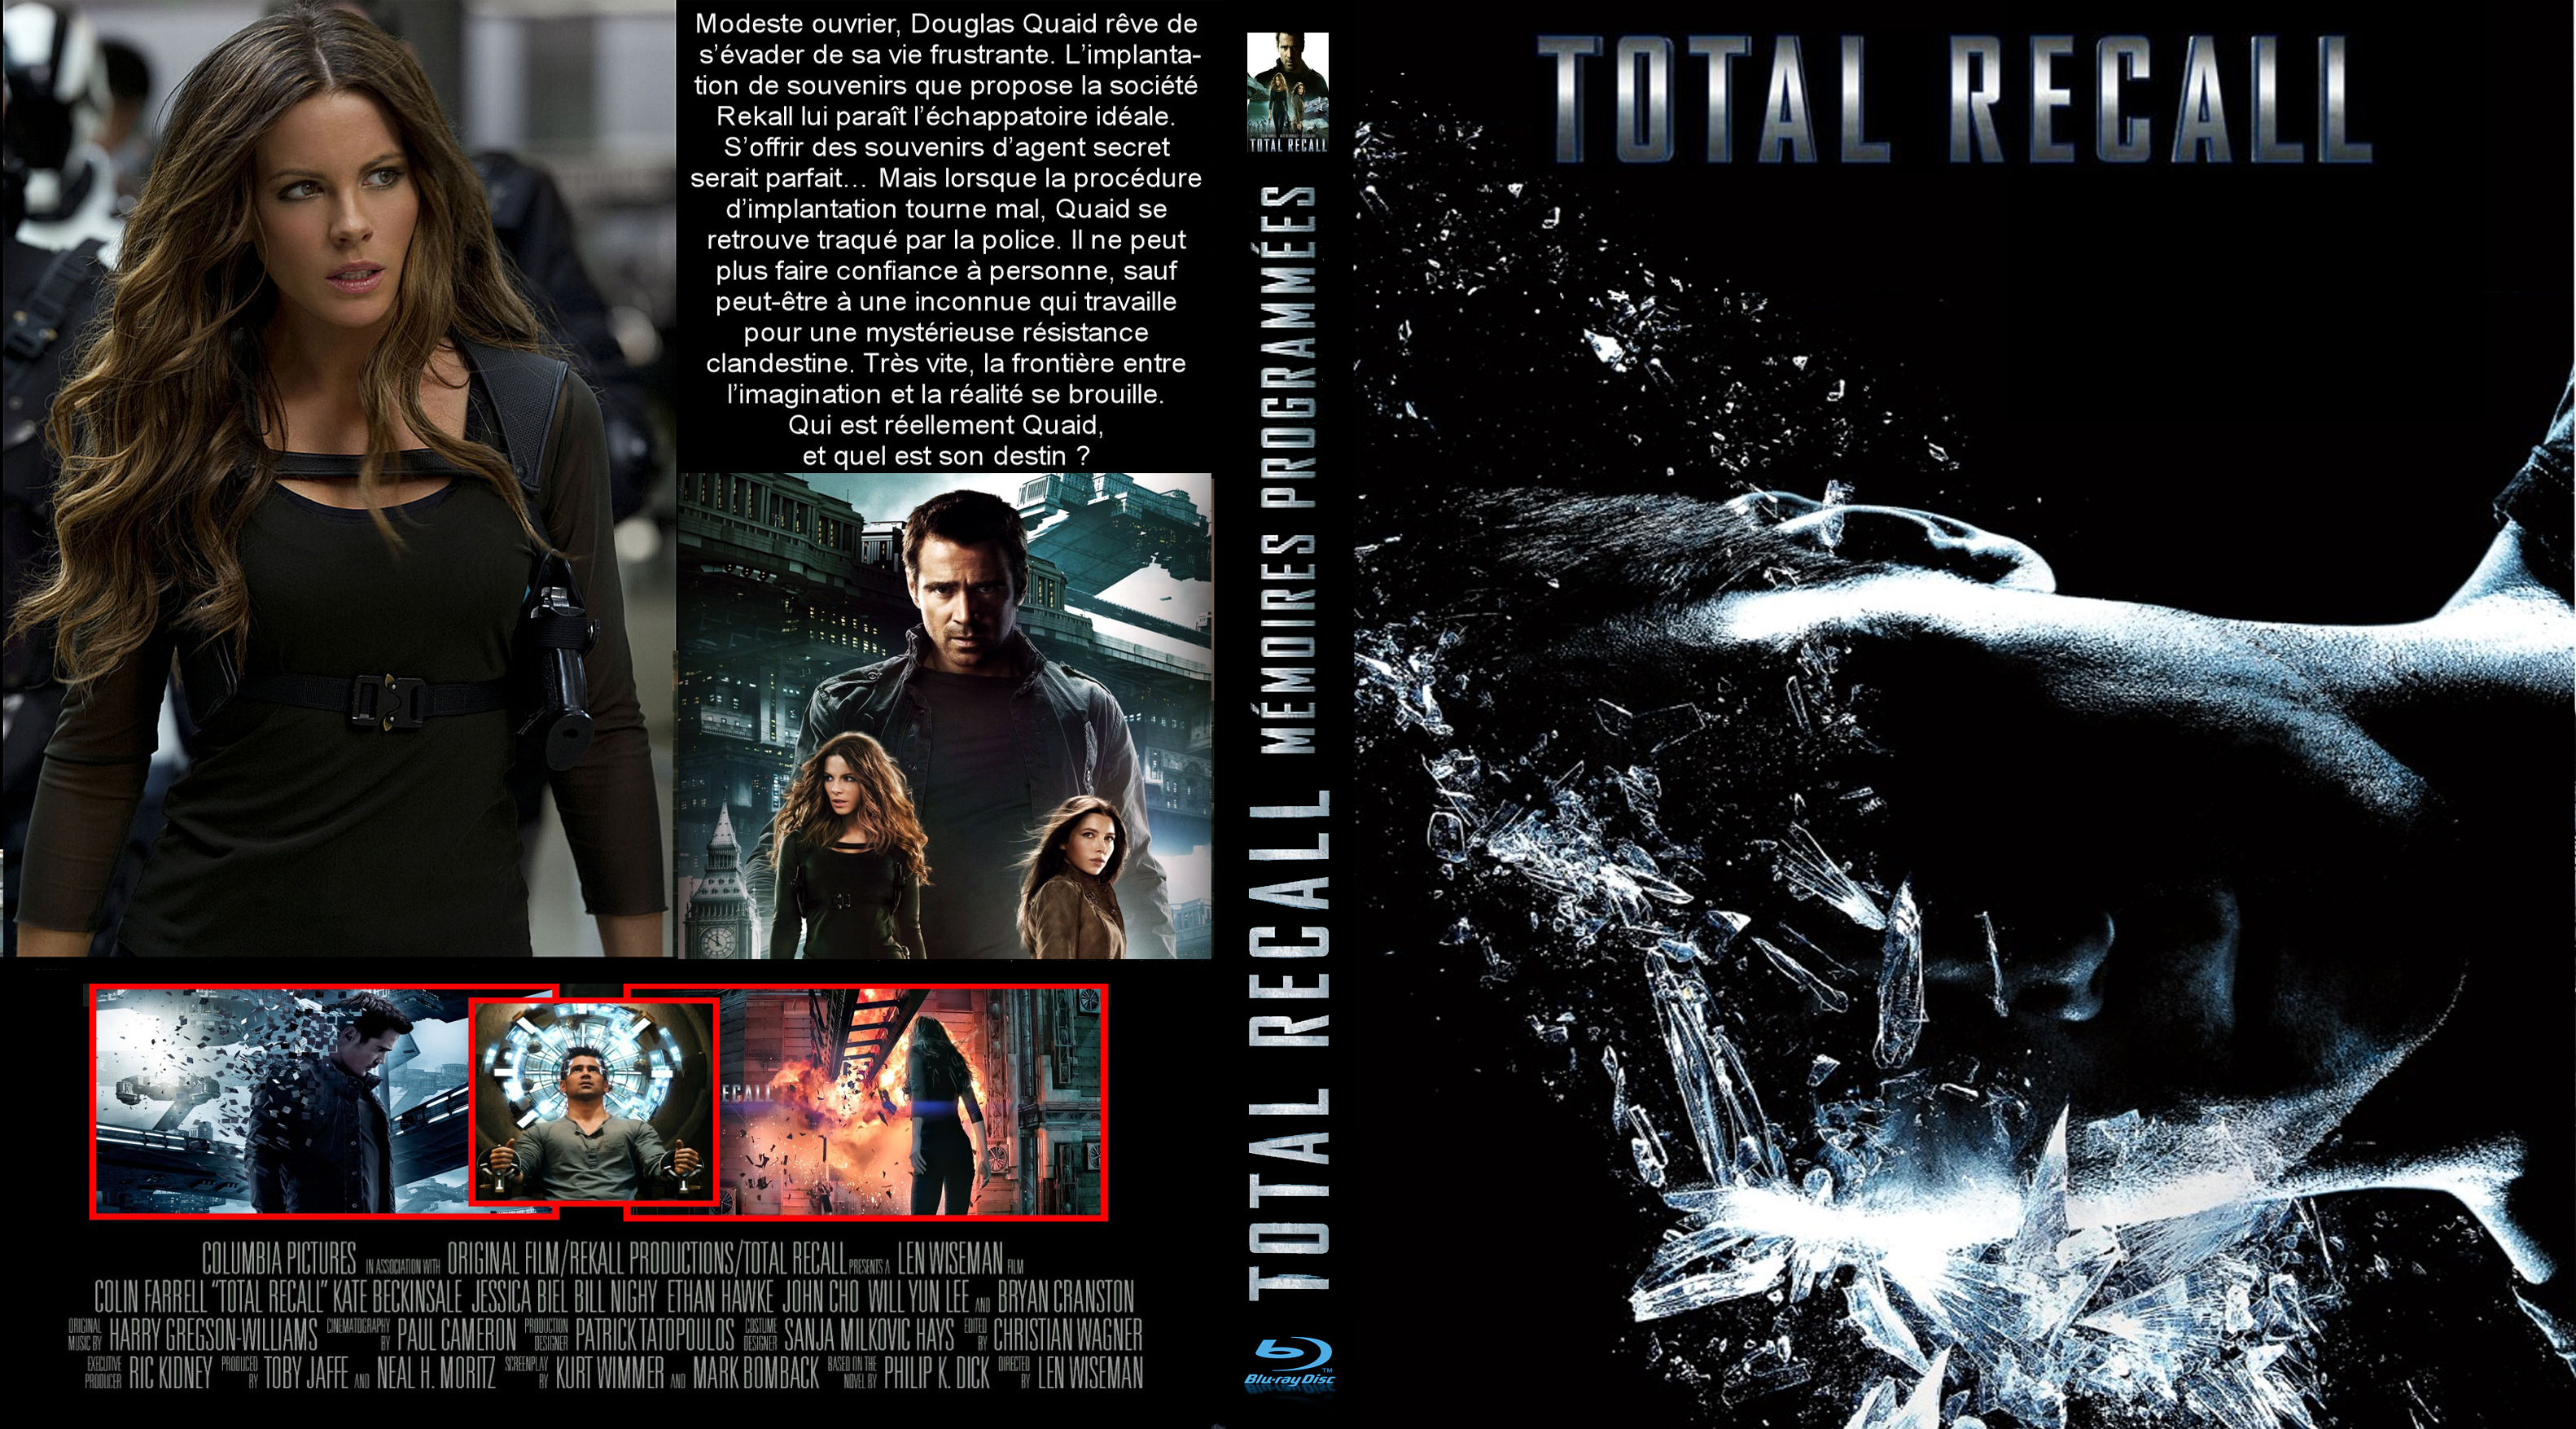 Jaquette DVD Total recall mmoires programmes custom v3 (BLU-RAY)